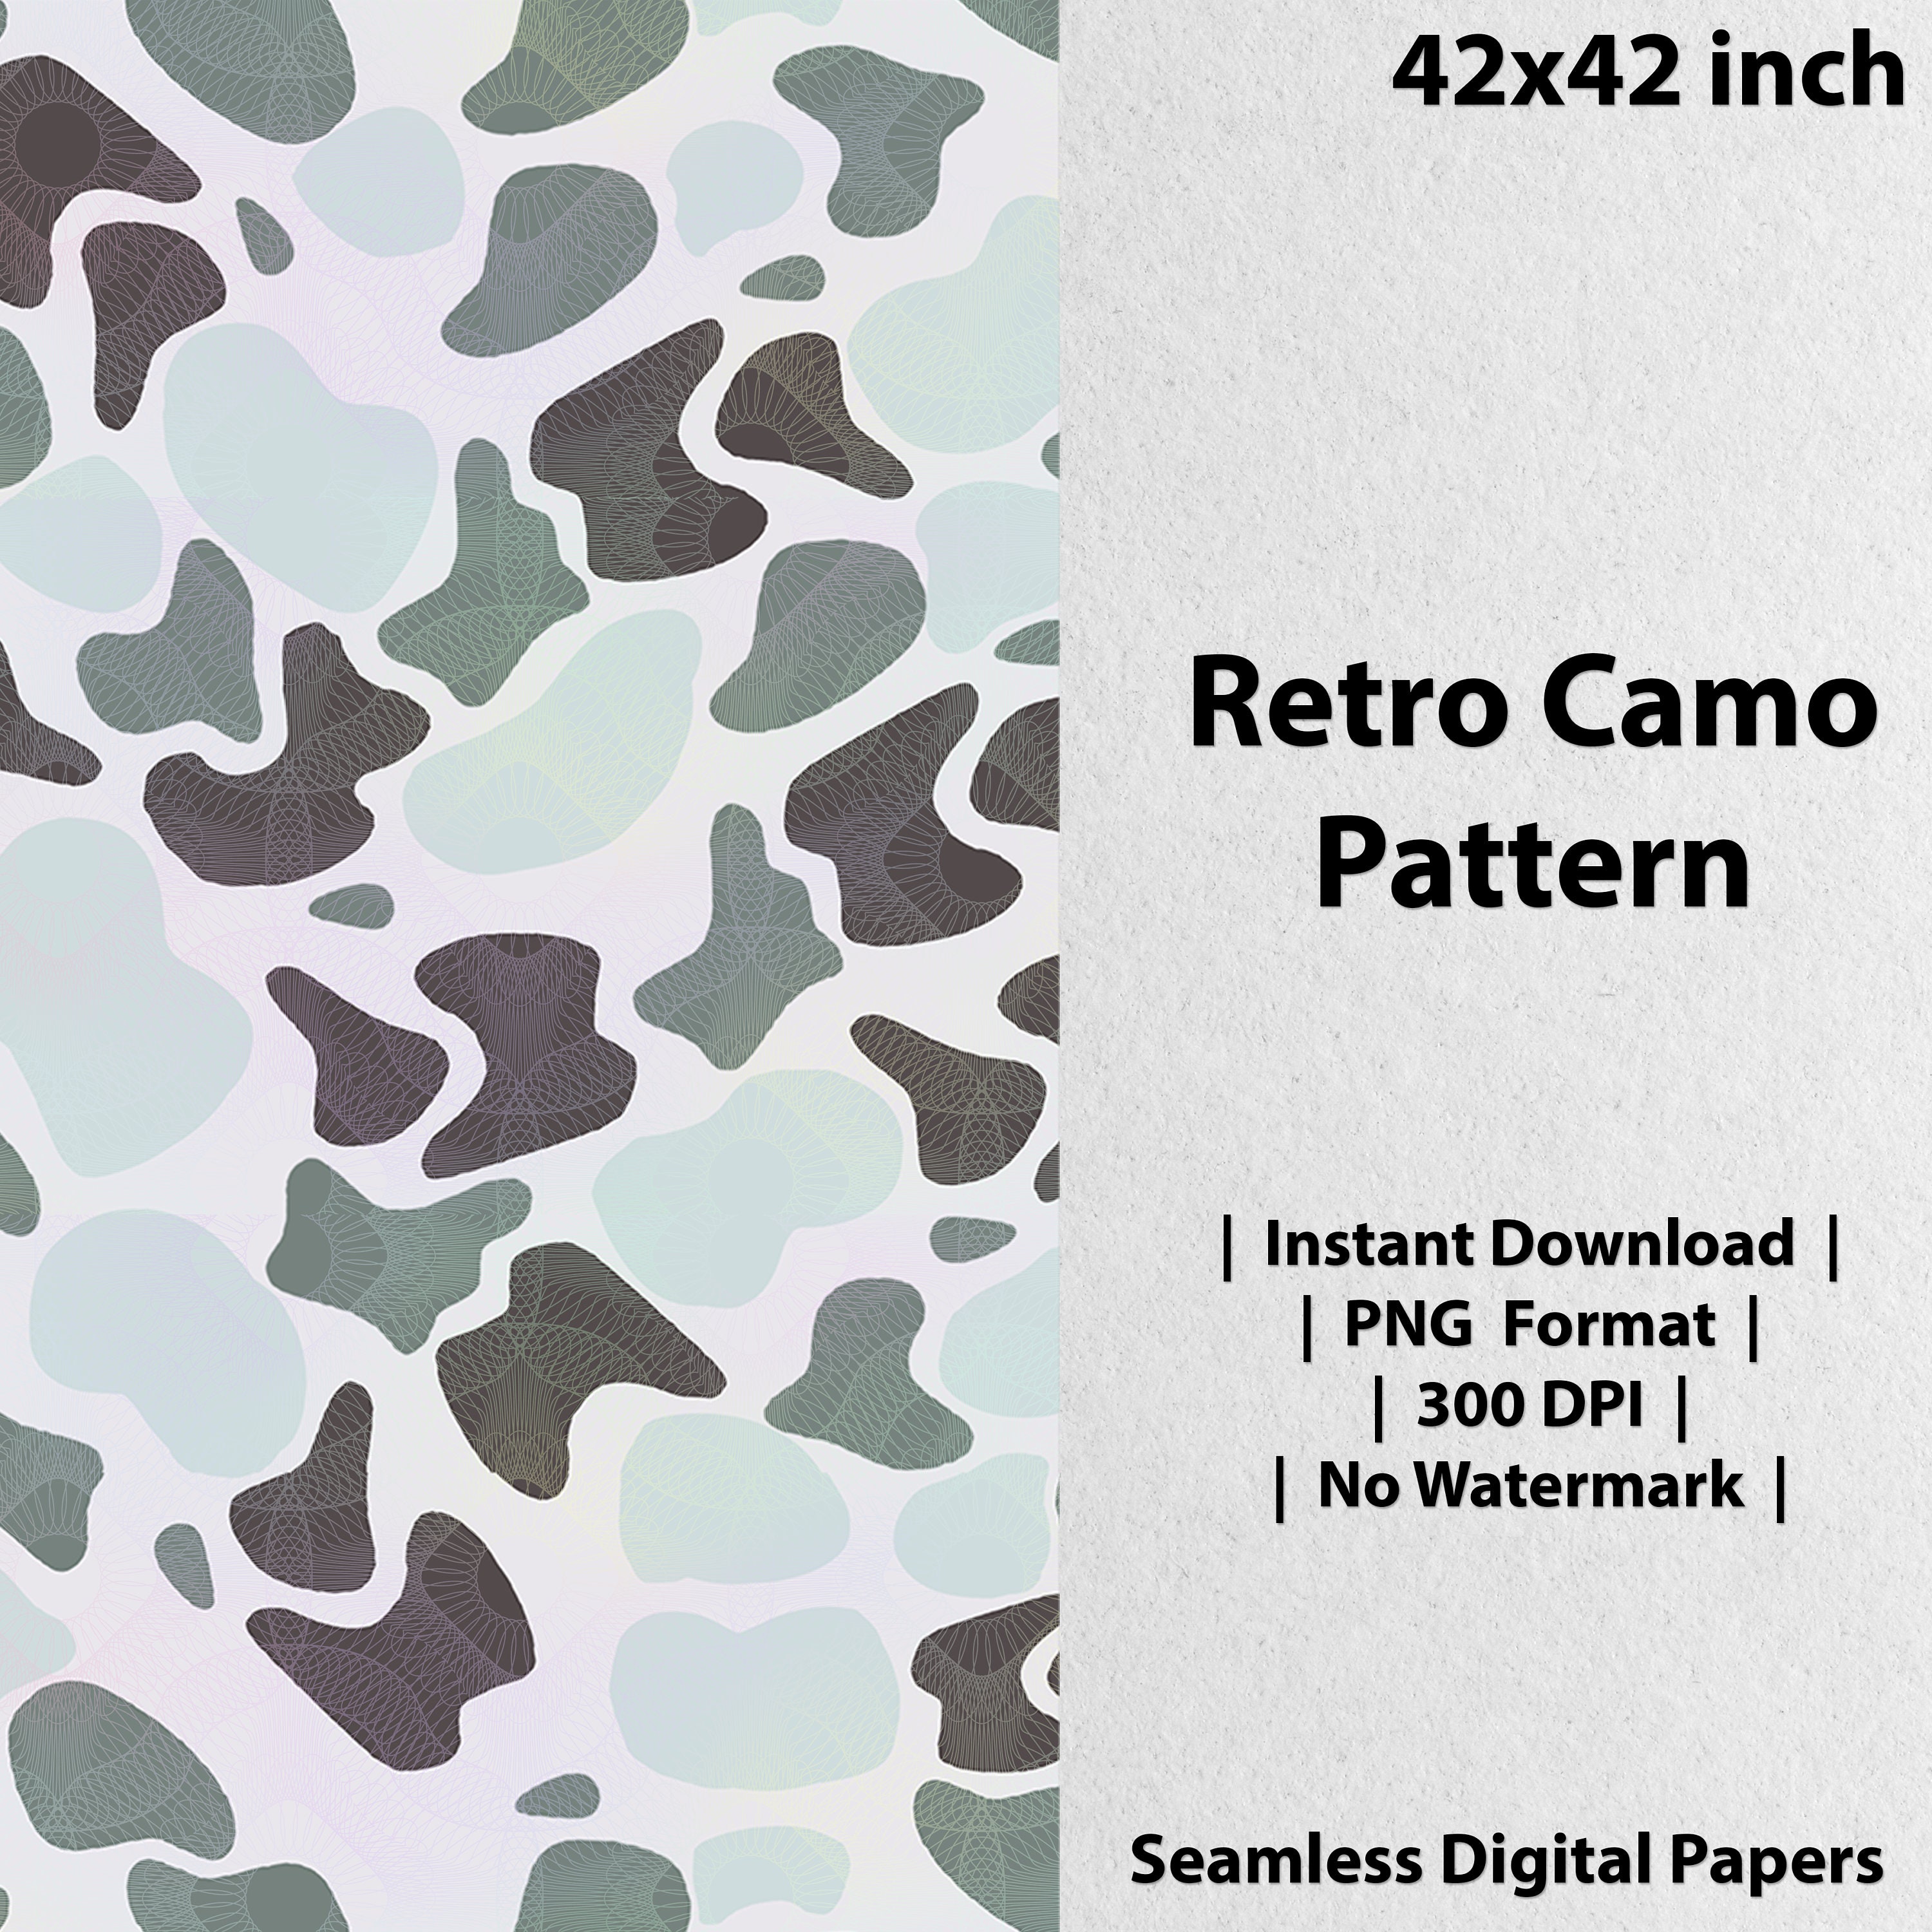  9 Pieces Camo Stencils for Spray Paint, Camouflage